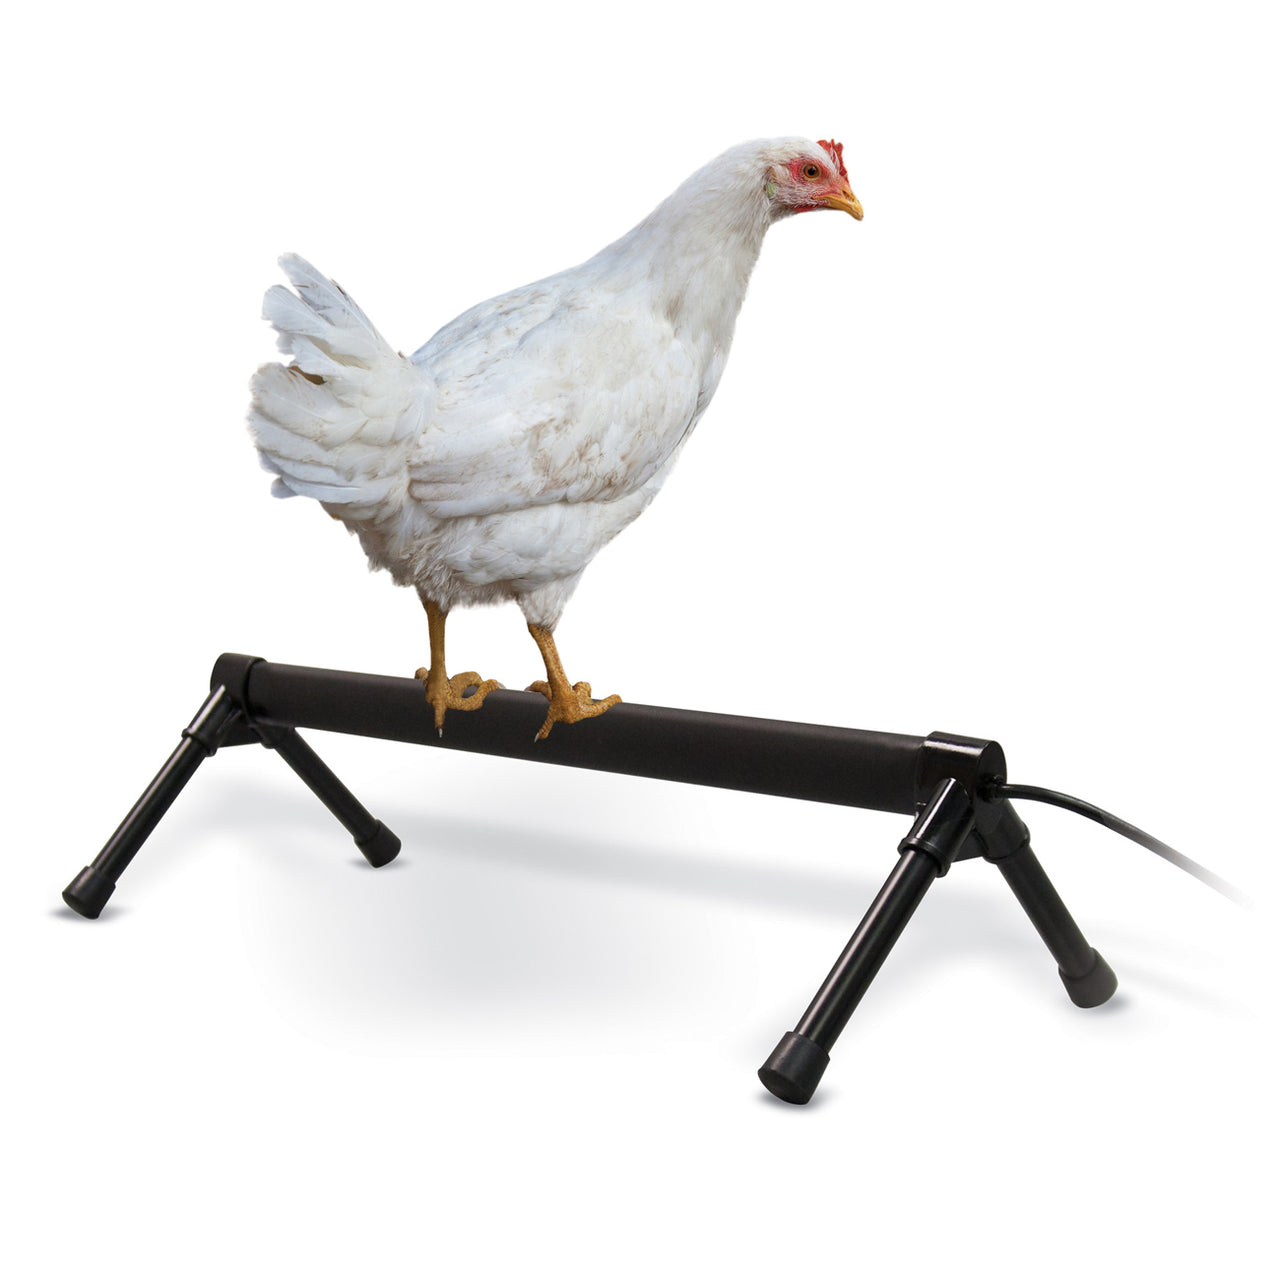 K&h Pet Products Thermo-Chicken Perch Gray 26 - Chicken Perch K&h Pet Products - Canada